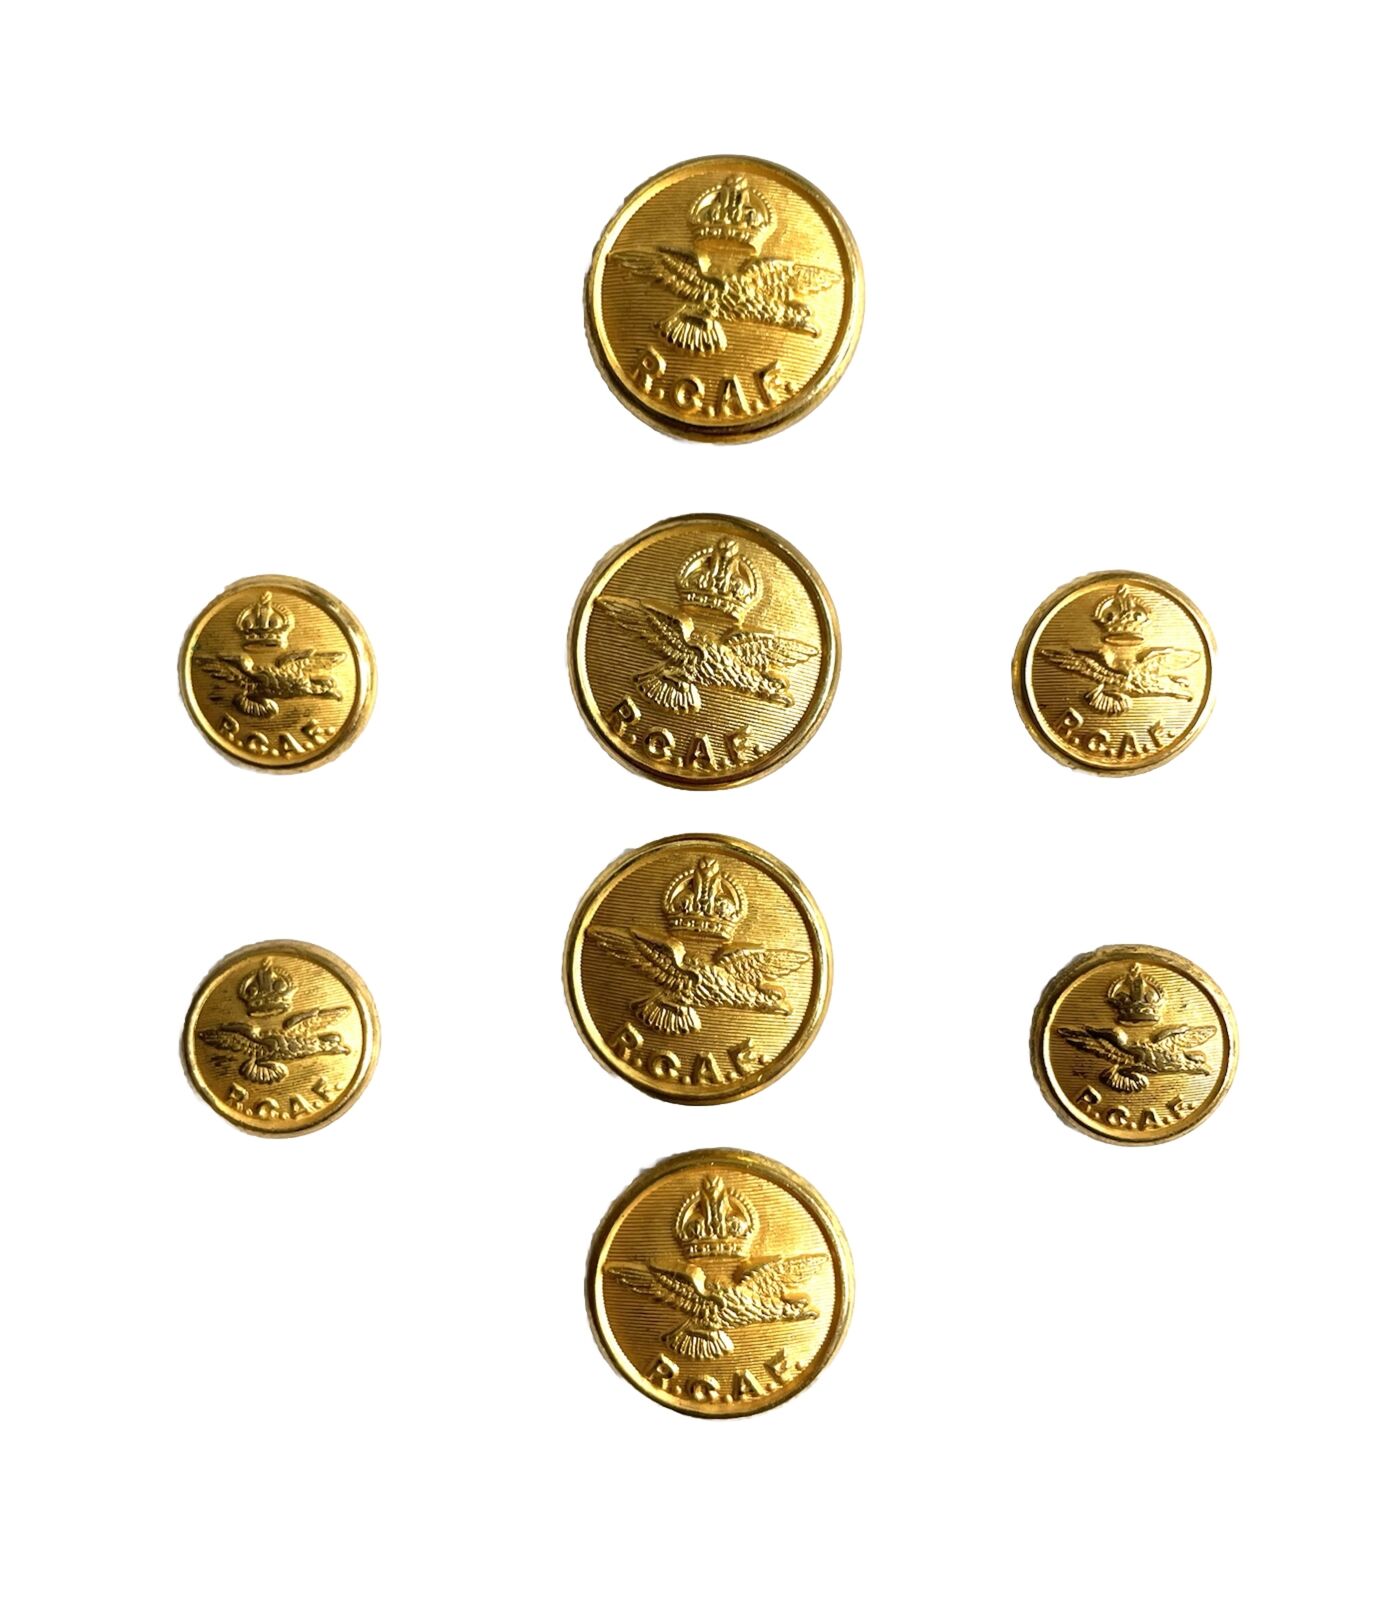 WW2 era KC RCAF Canadian Air Force Service Buttons Set of 8 - 4 Small & 4 Large